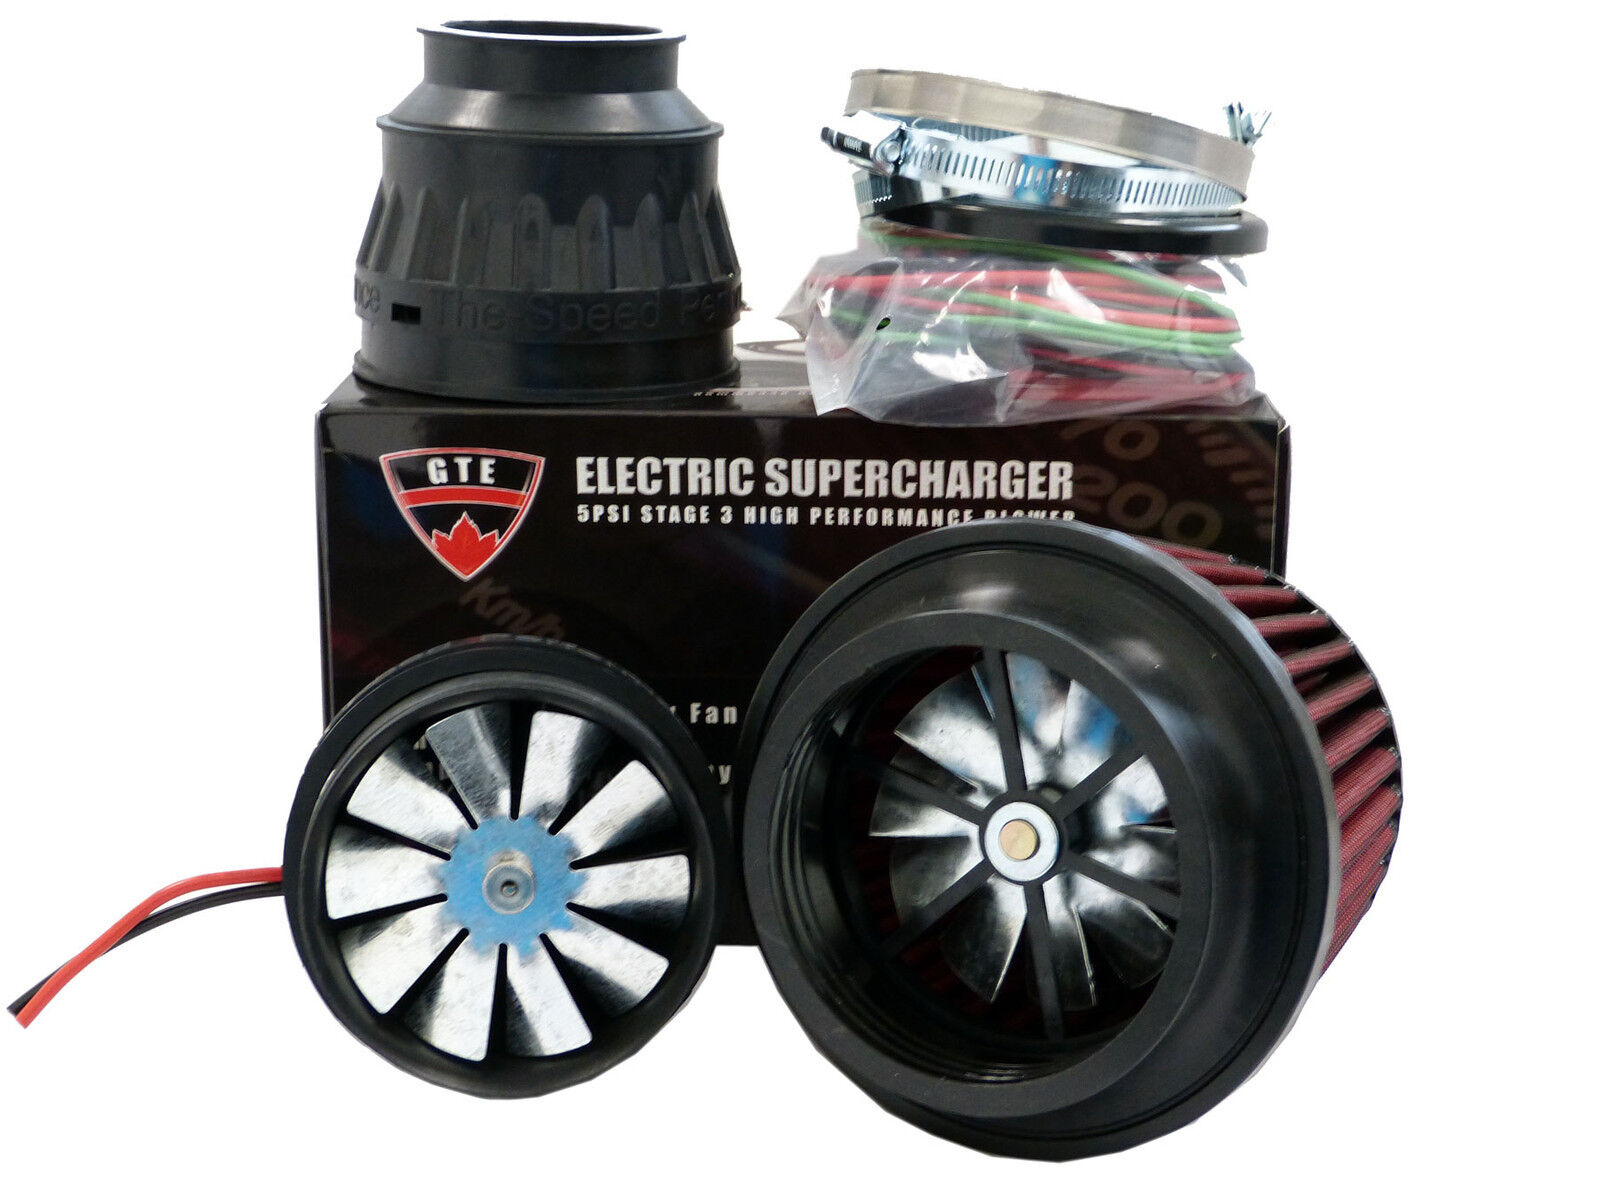 5PSI ELECTRIC SUPERCHARGER TURBO ADD HORSEPOWER + TORQUE INTAKE FOR Cadillac